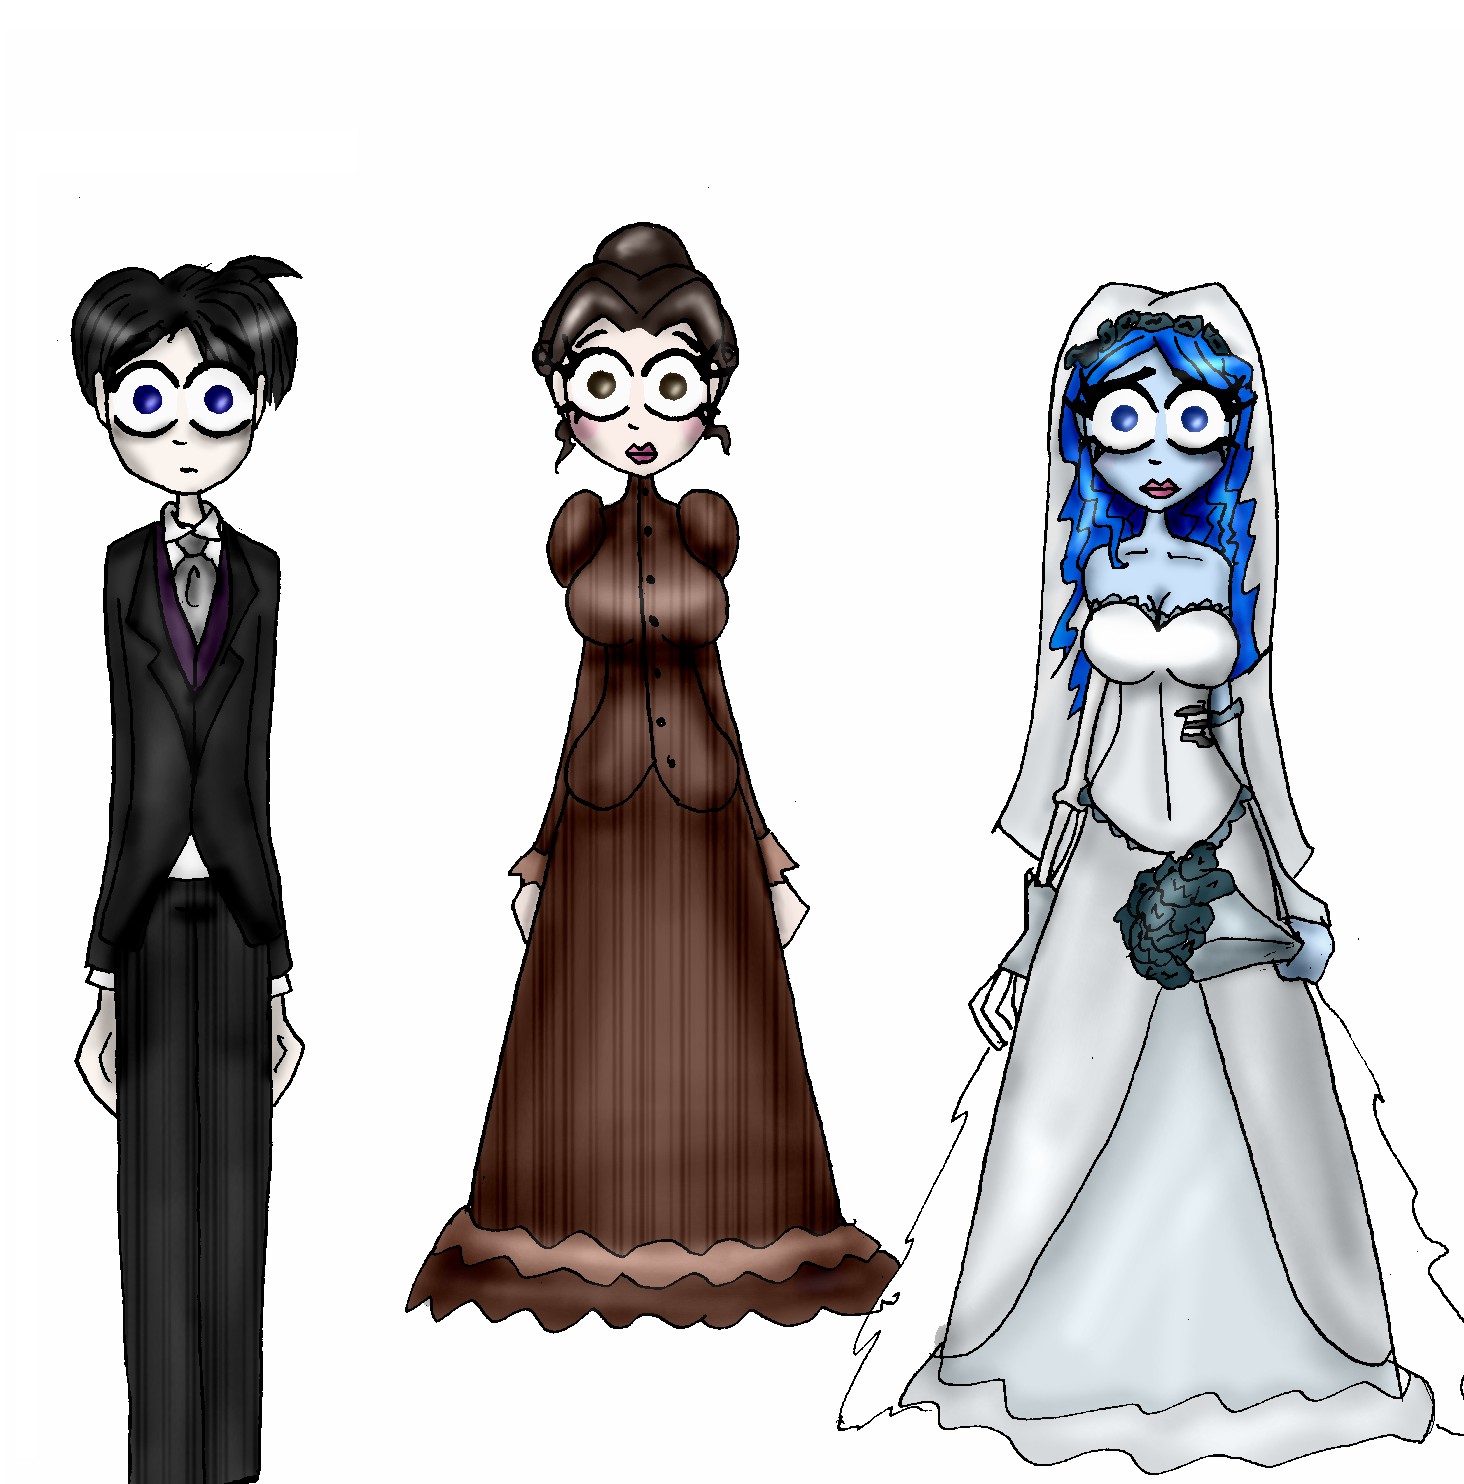 Corpse Bride characters by BethStar